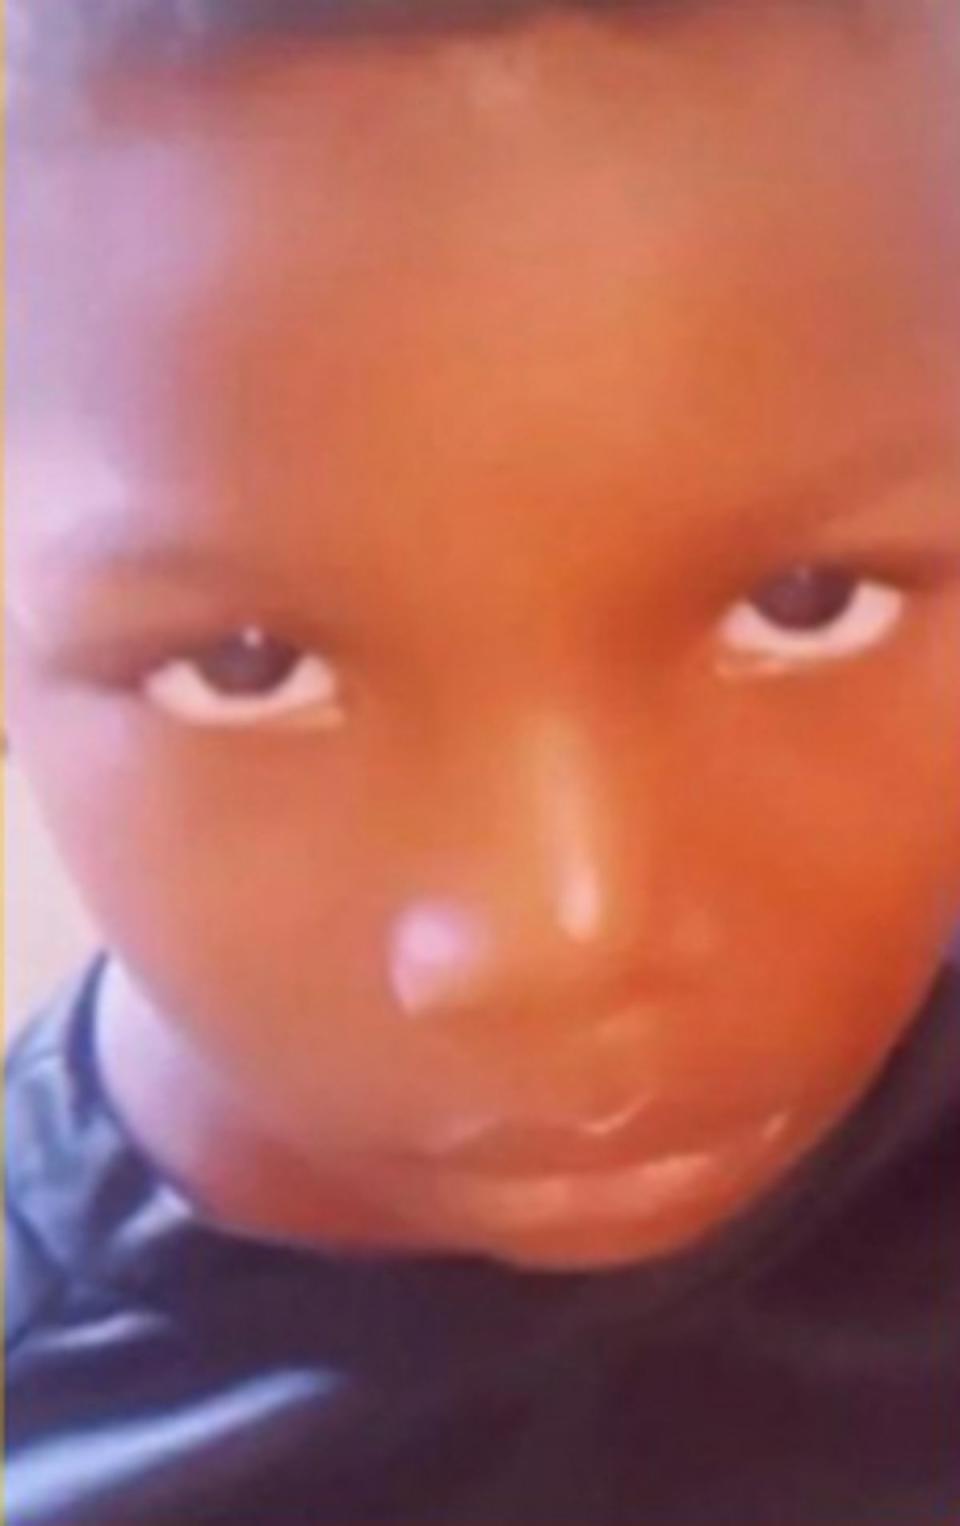 Eight-year-old Martonio was found dead in the attic of a family home in Ohio (Columbus Division of Police)